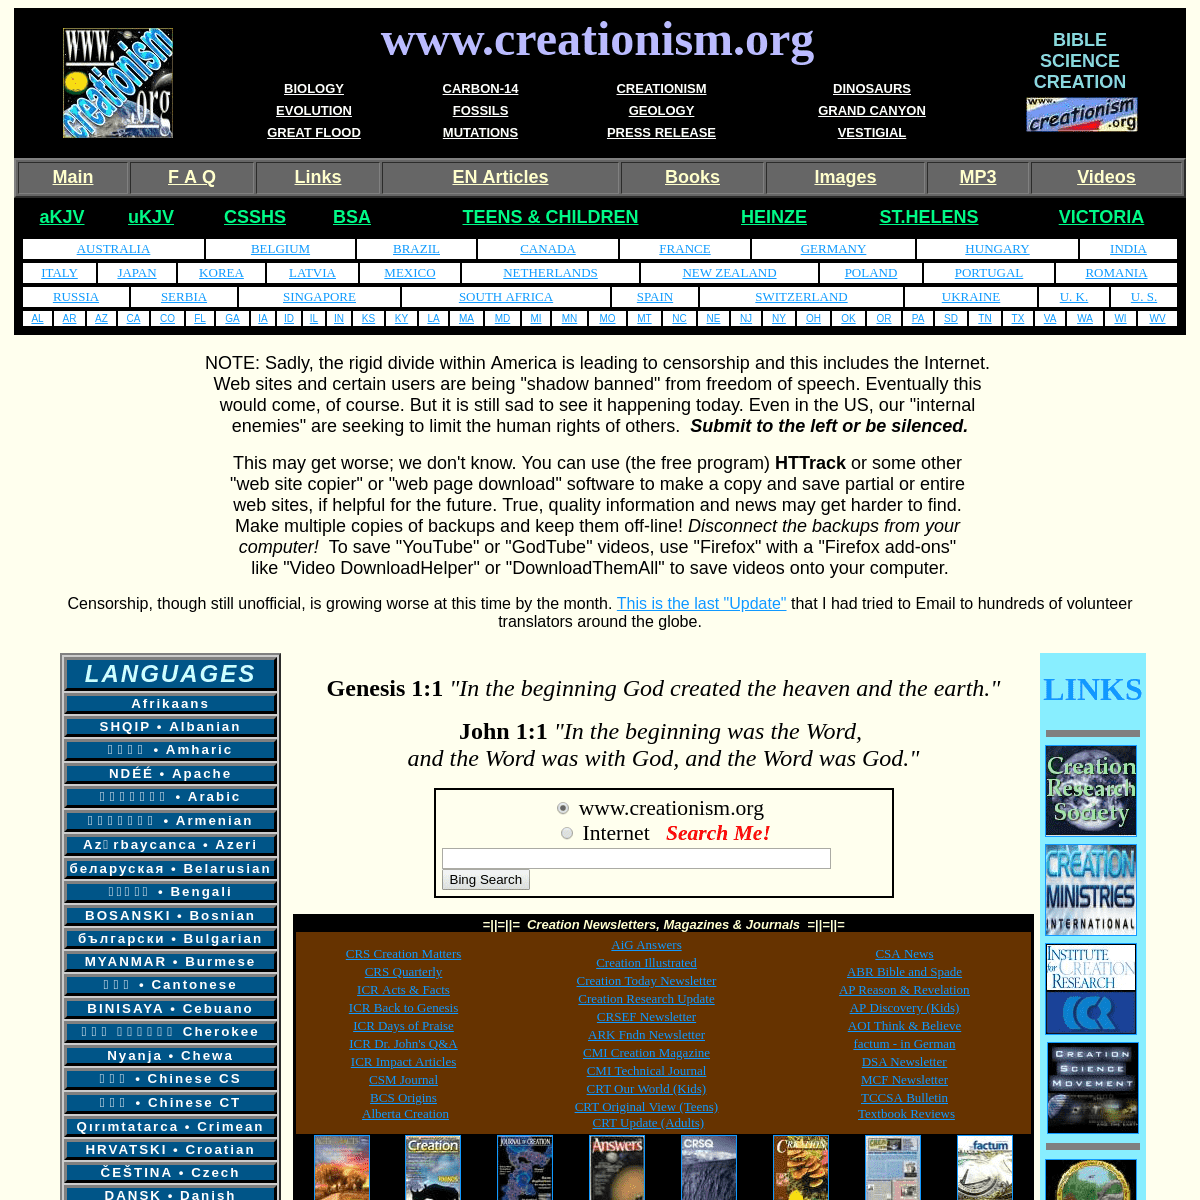 A complete backup of creationism.org